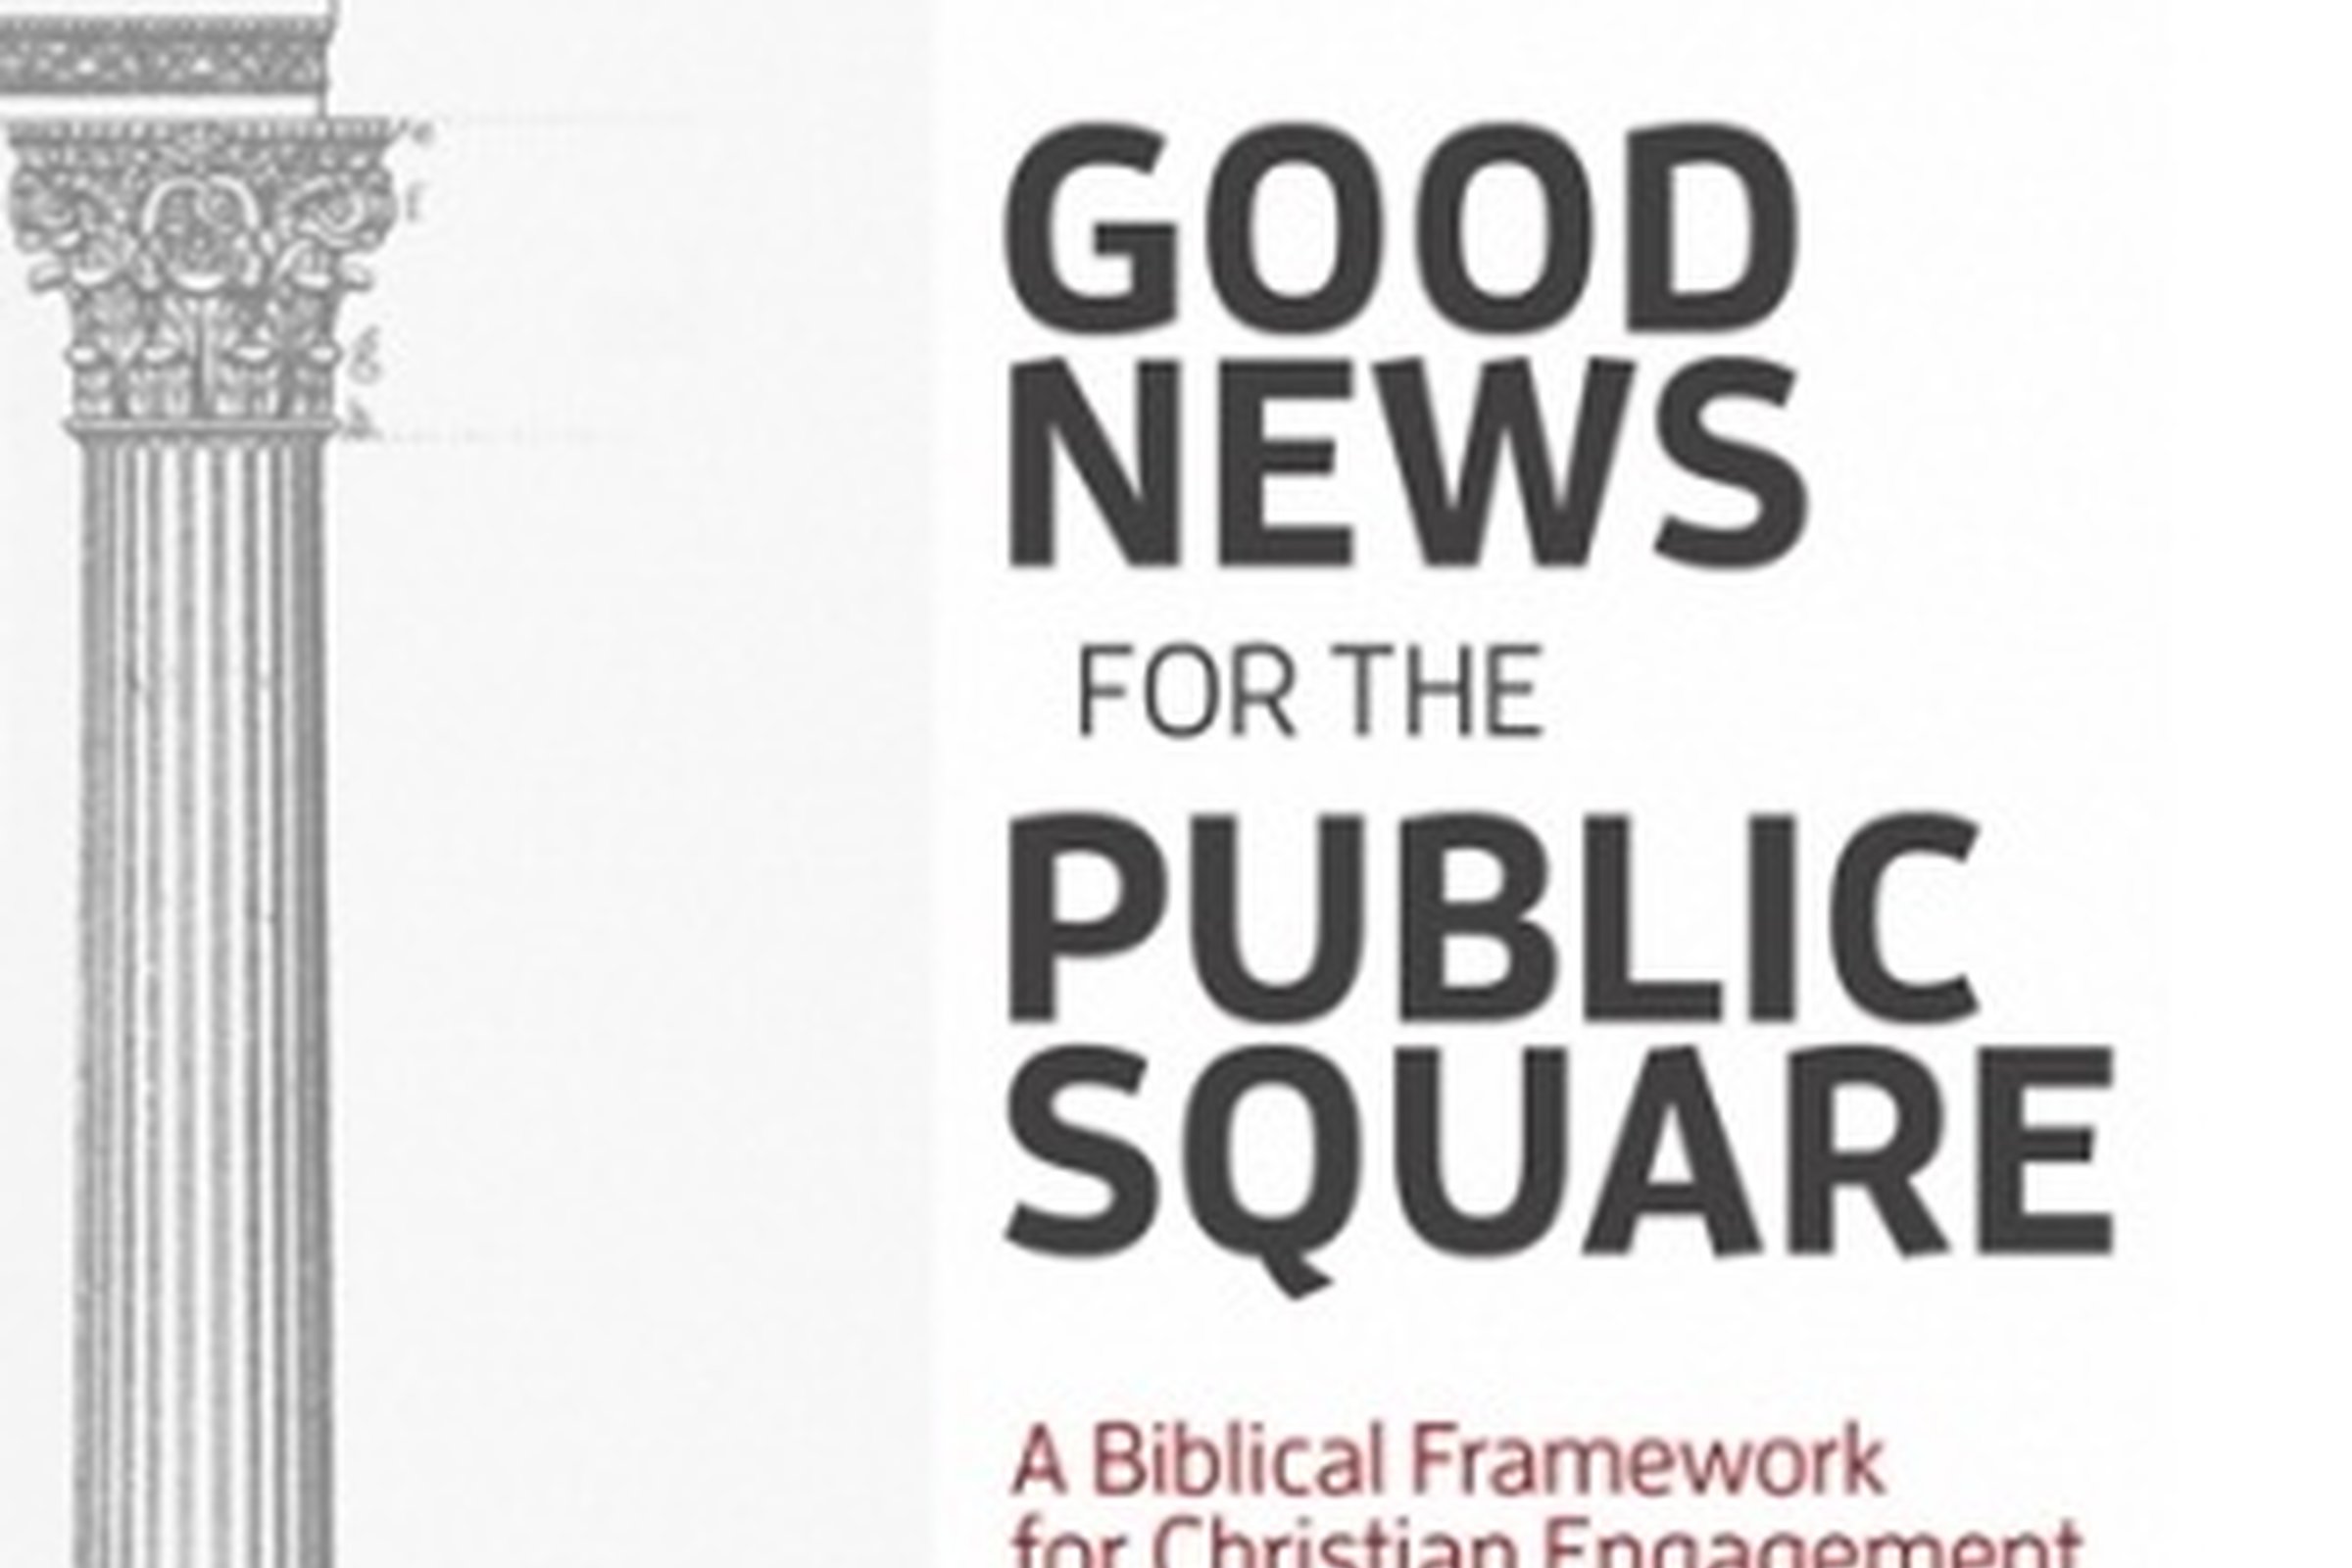 Good news for the public square